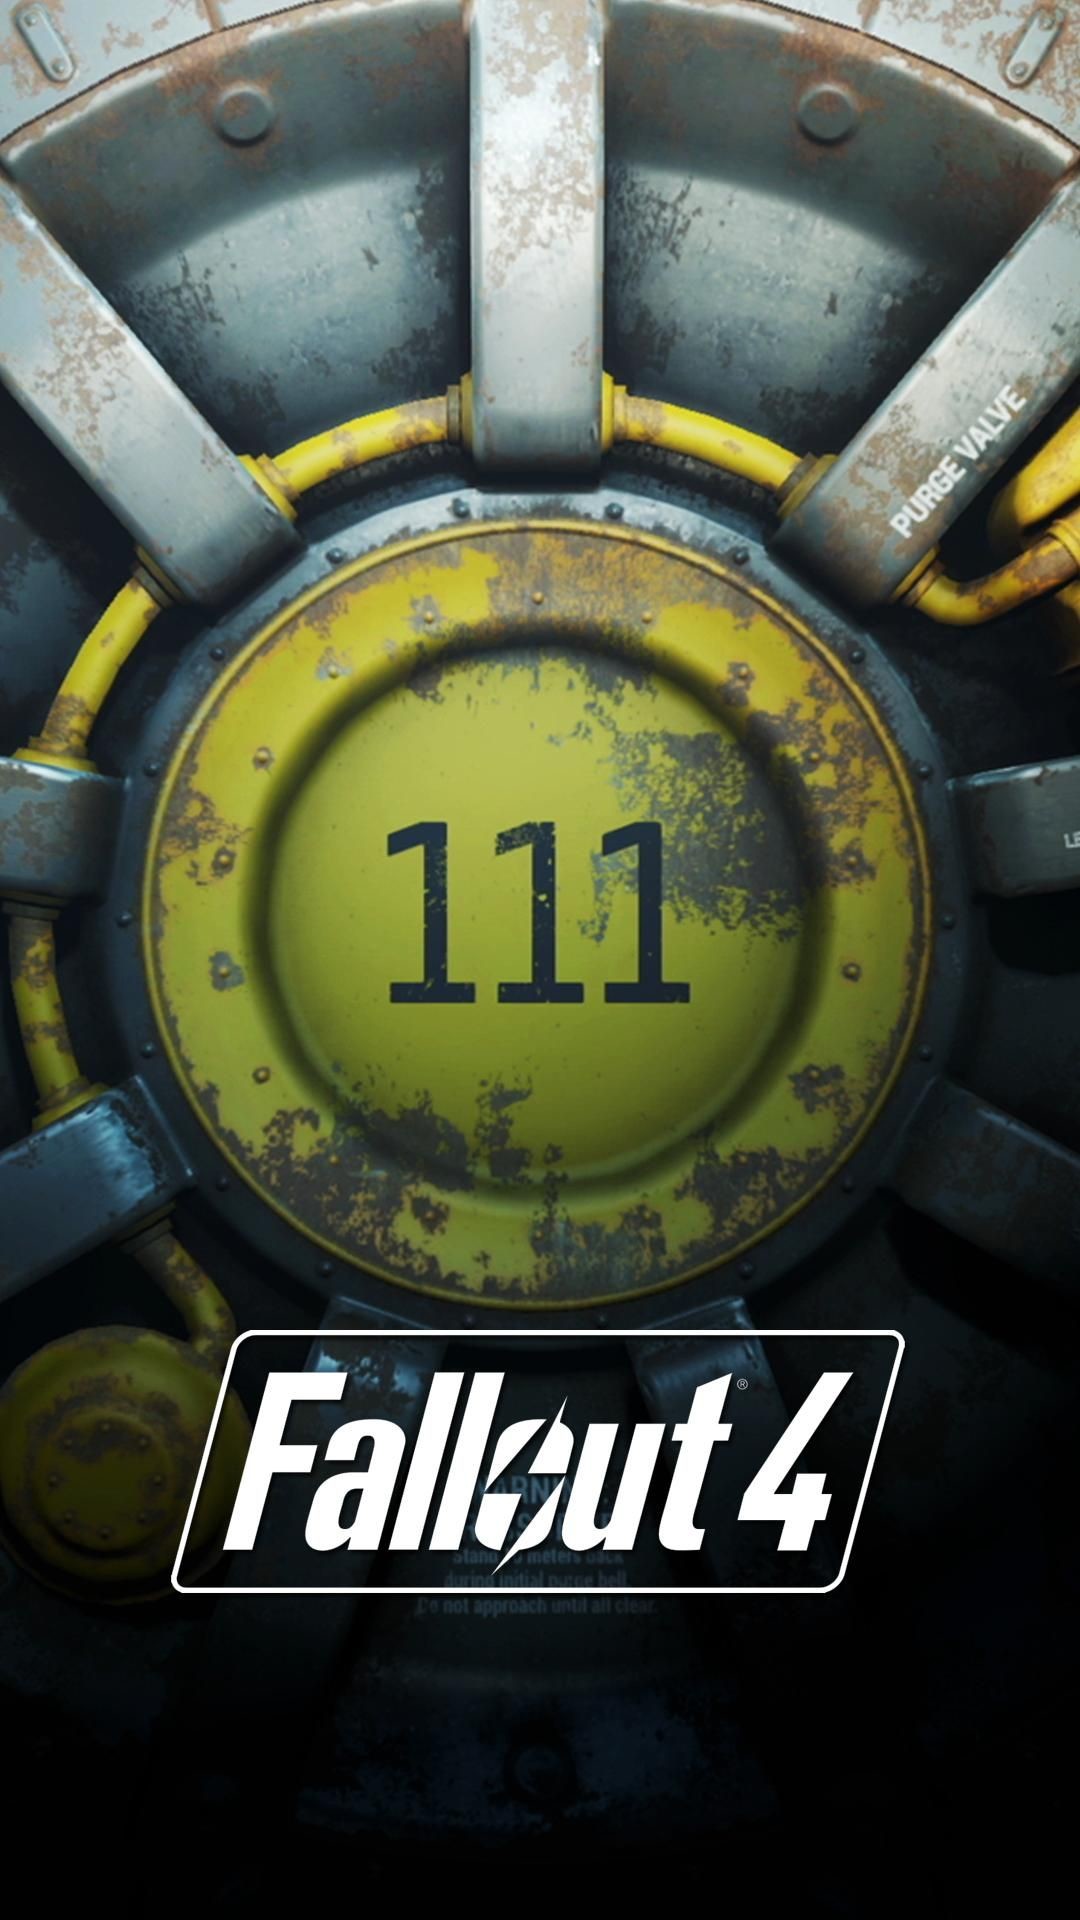 1080x1920 I made some Fallout 4 lock screen wallpapers from E3 stills - Album on Imgur